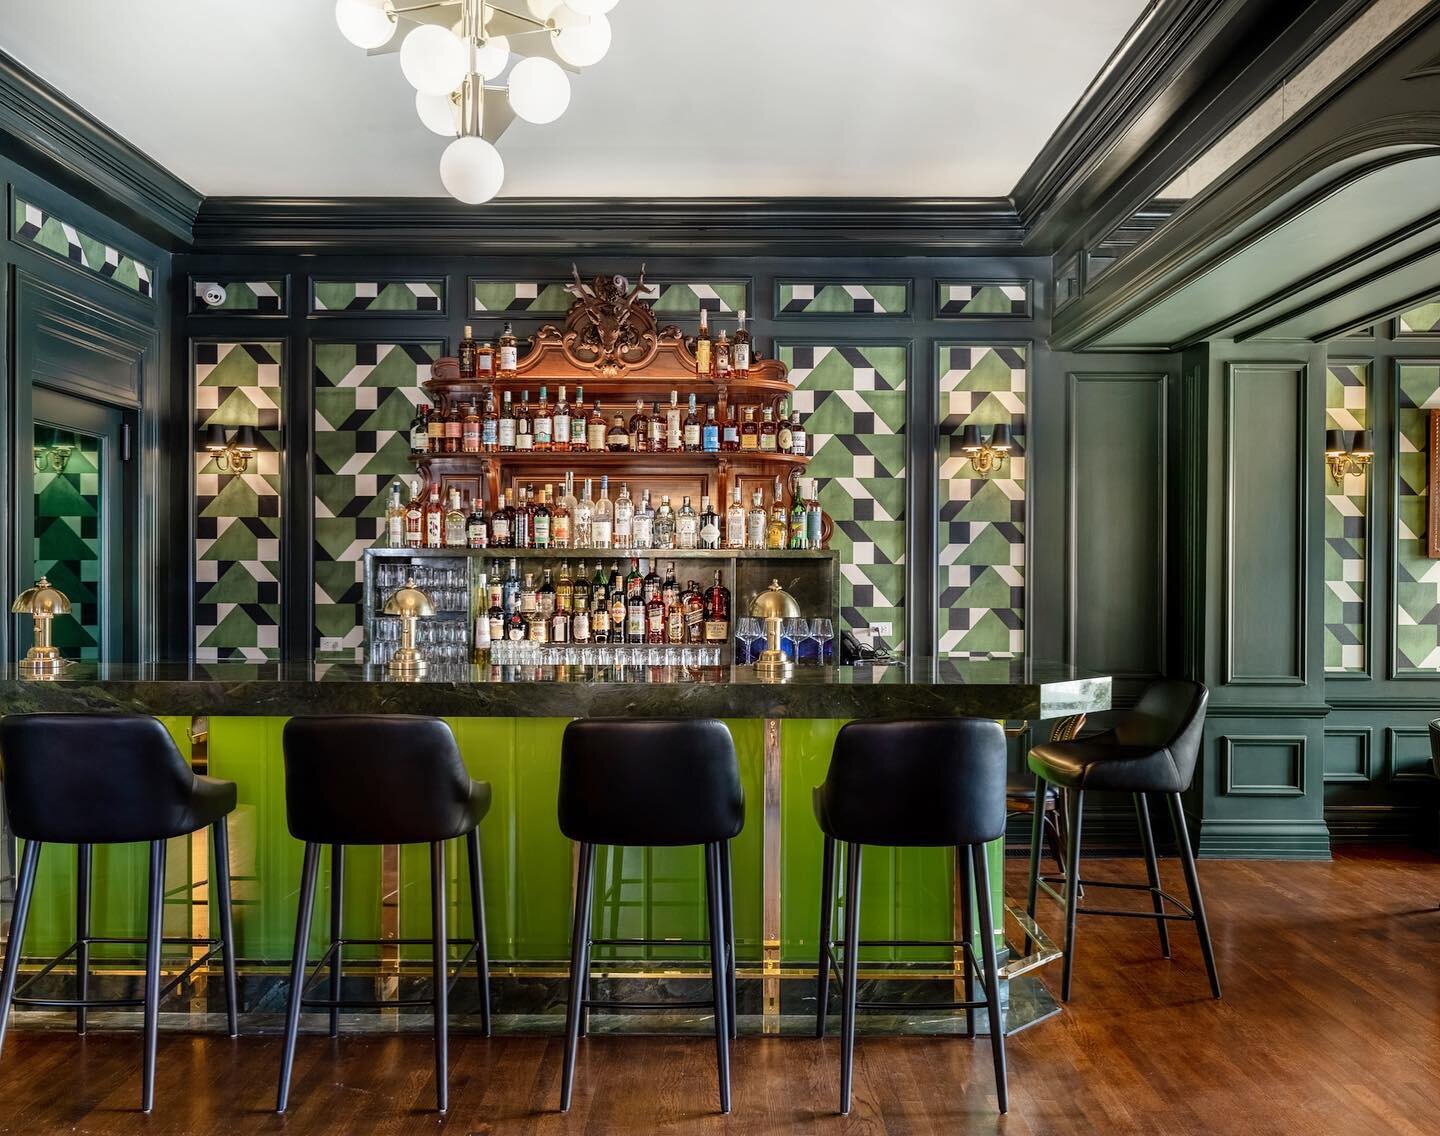 In the ❤️ of our Mansion, you&rsquo;ll find Bar No.3 &mdash;our full-service cocktail bar serving some of the city&rsquo;s most inventive and delicious craft seasonal and classic cocktails. 🍸🍹🥃 Expect exceptional service, delicious food, and unsur